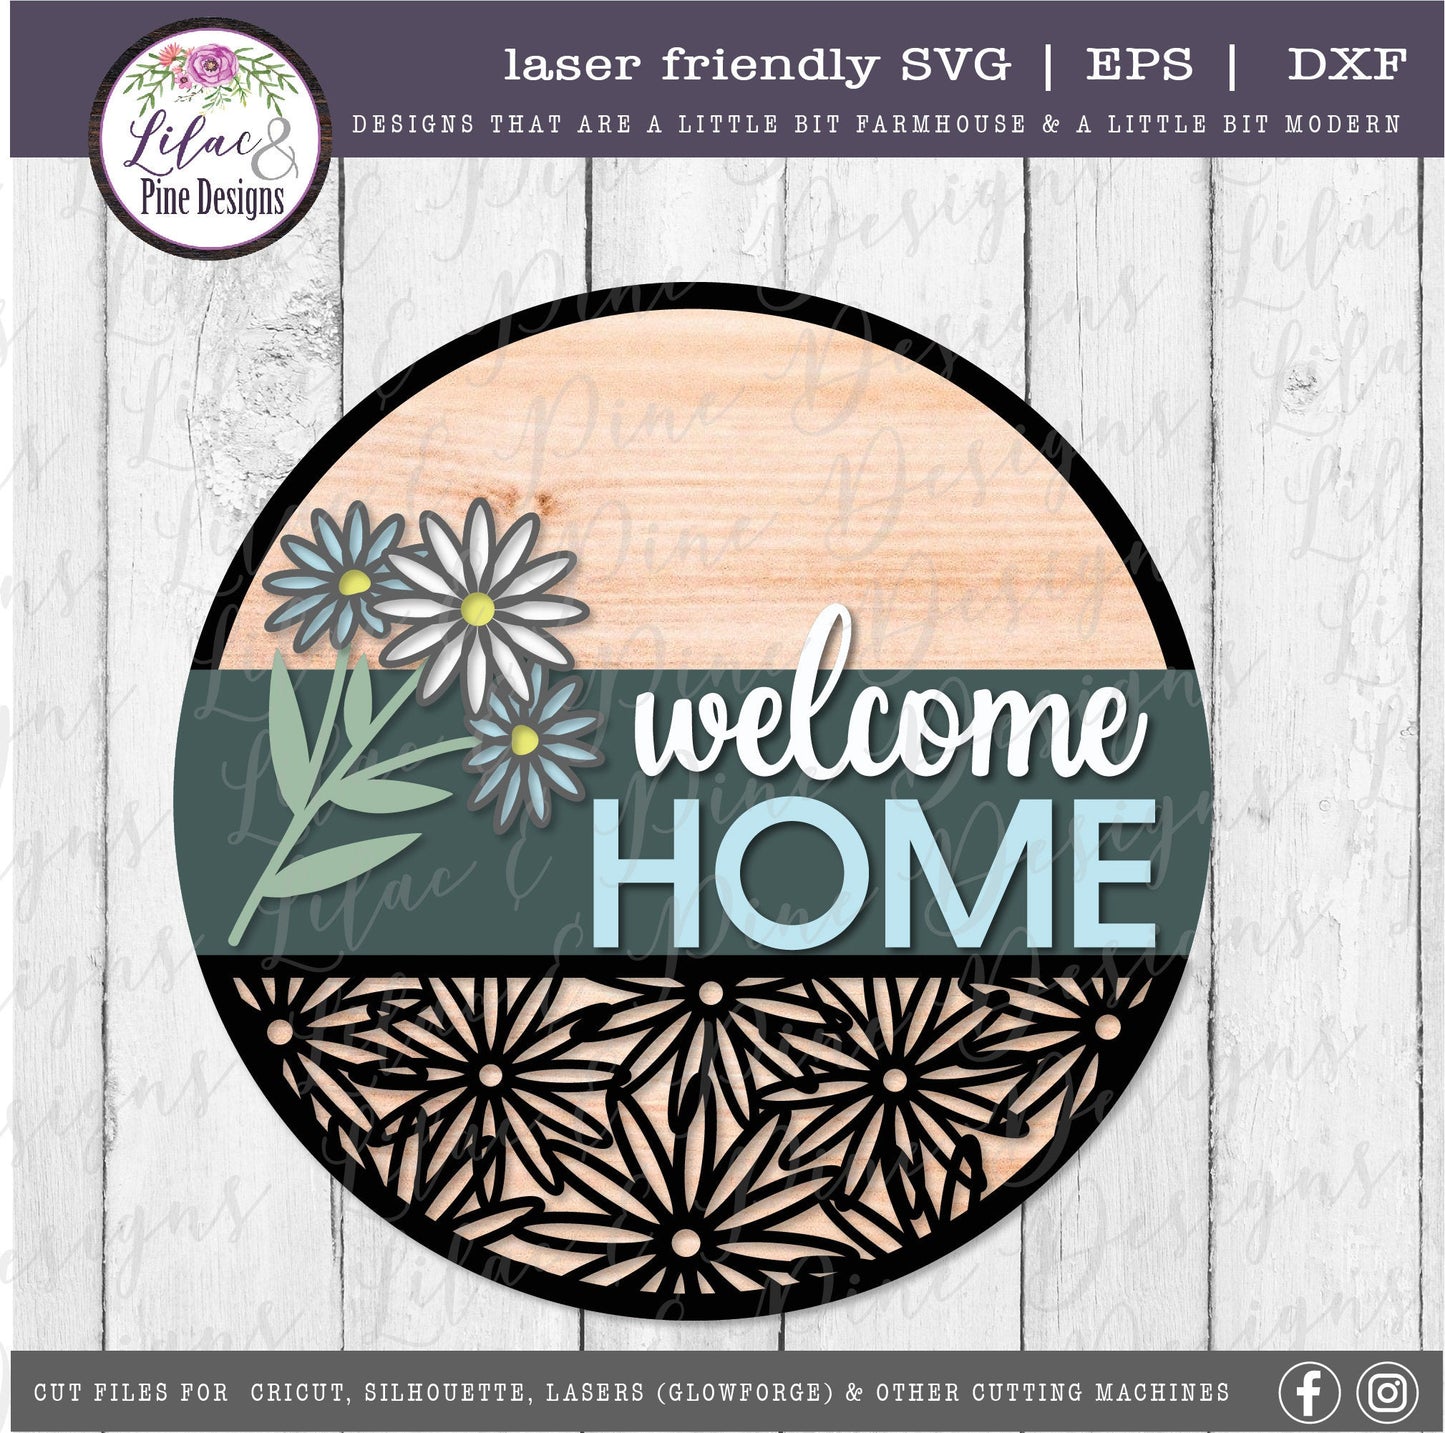 Daisy welcome home sign, summer svg, welcome home SVG, round sign, farmhouse decor, daisy SVG, floral Svg, Glowforge Svg, laser cut file